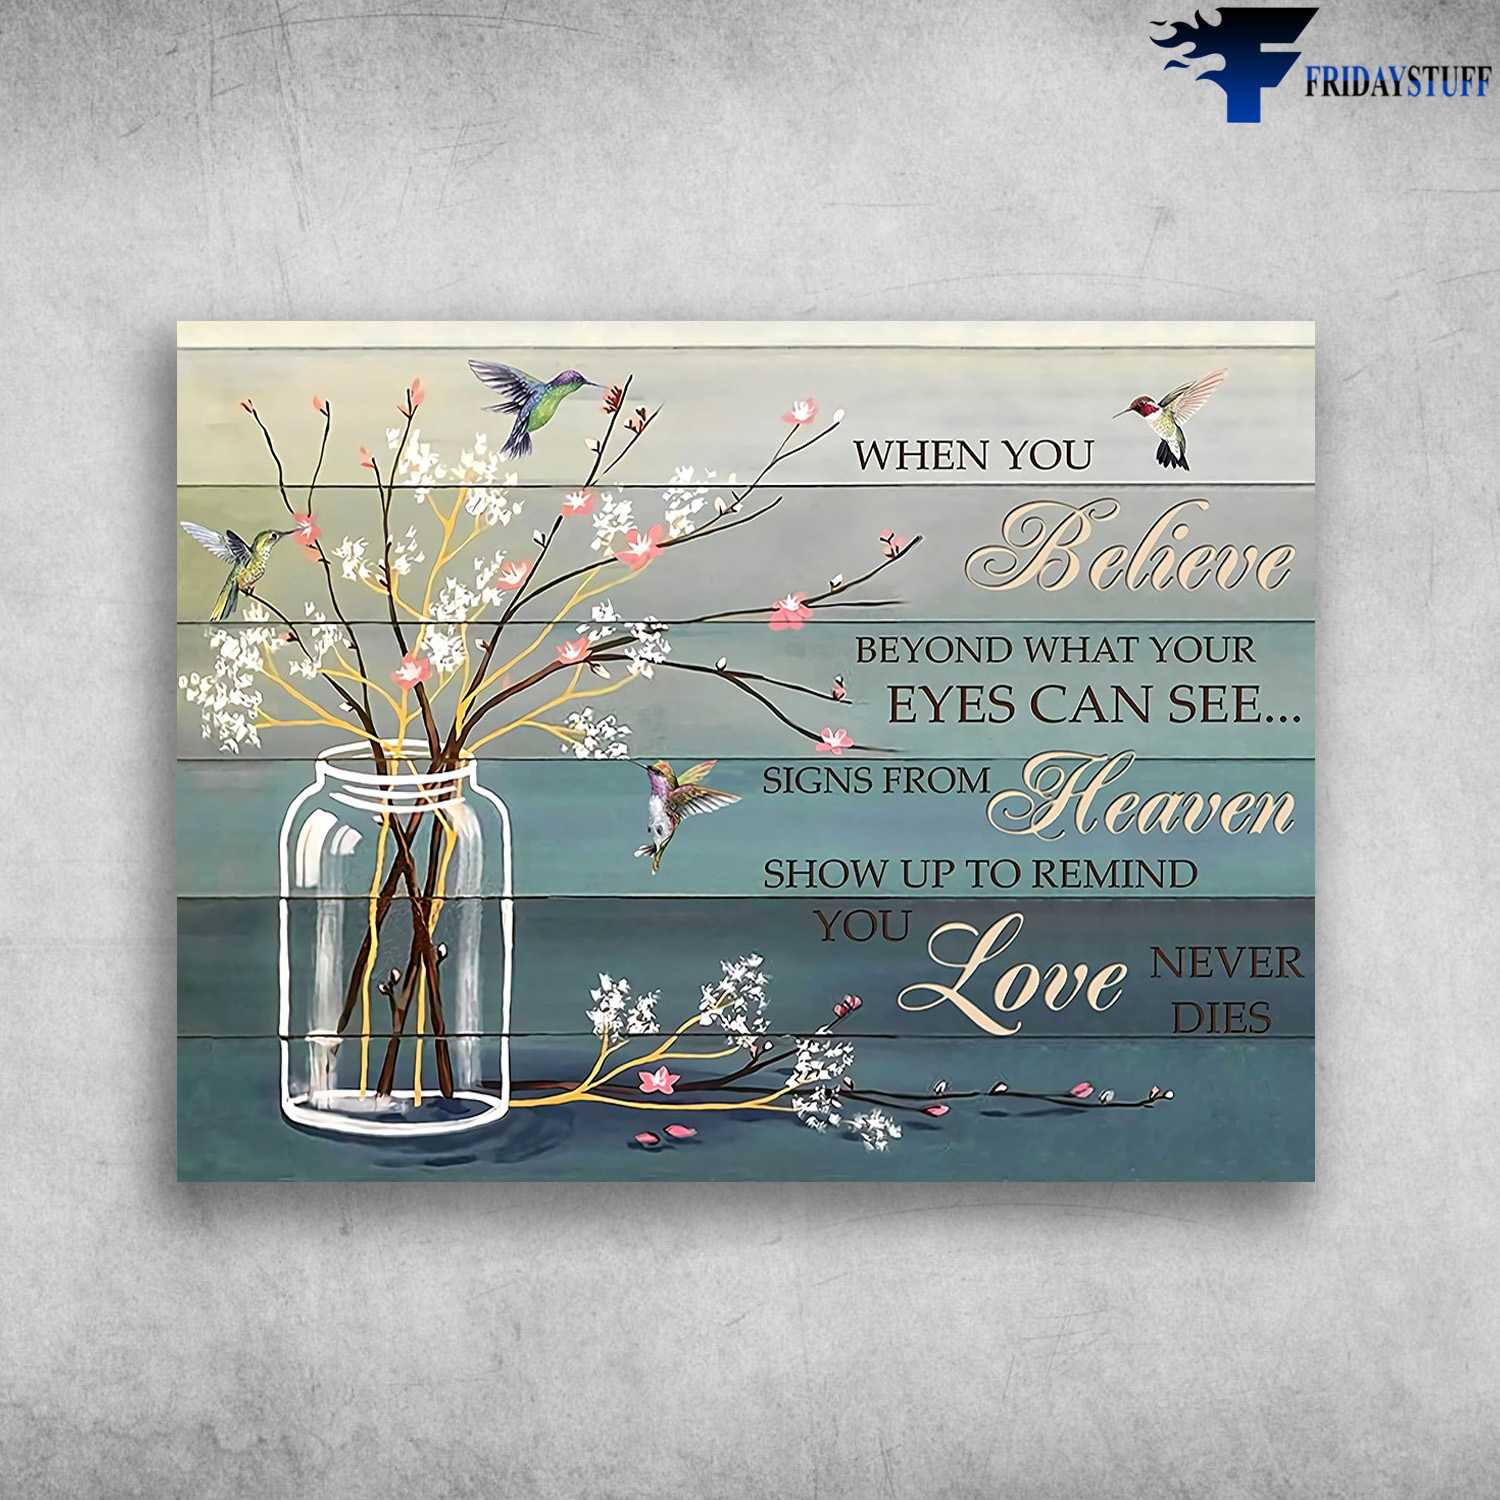 Hummingbird Poster, When You Believe Beyond What Your Eyes Can See, Signs From Heaven, Show Up To Remind You, Love Never Dies